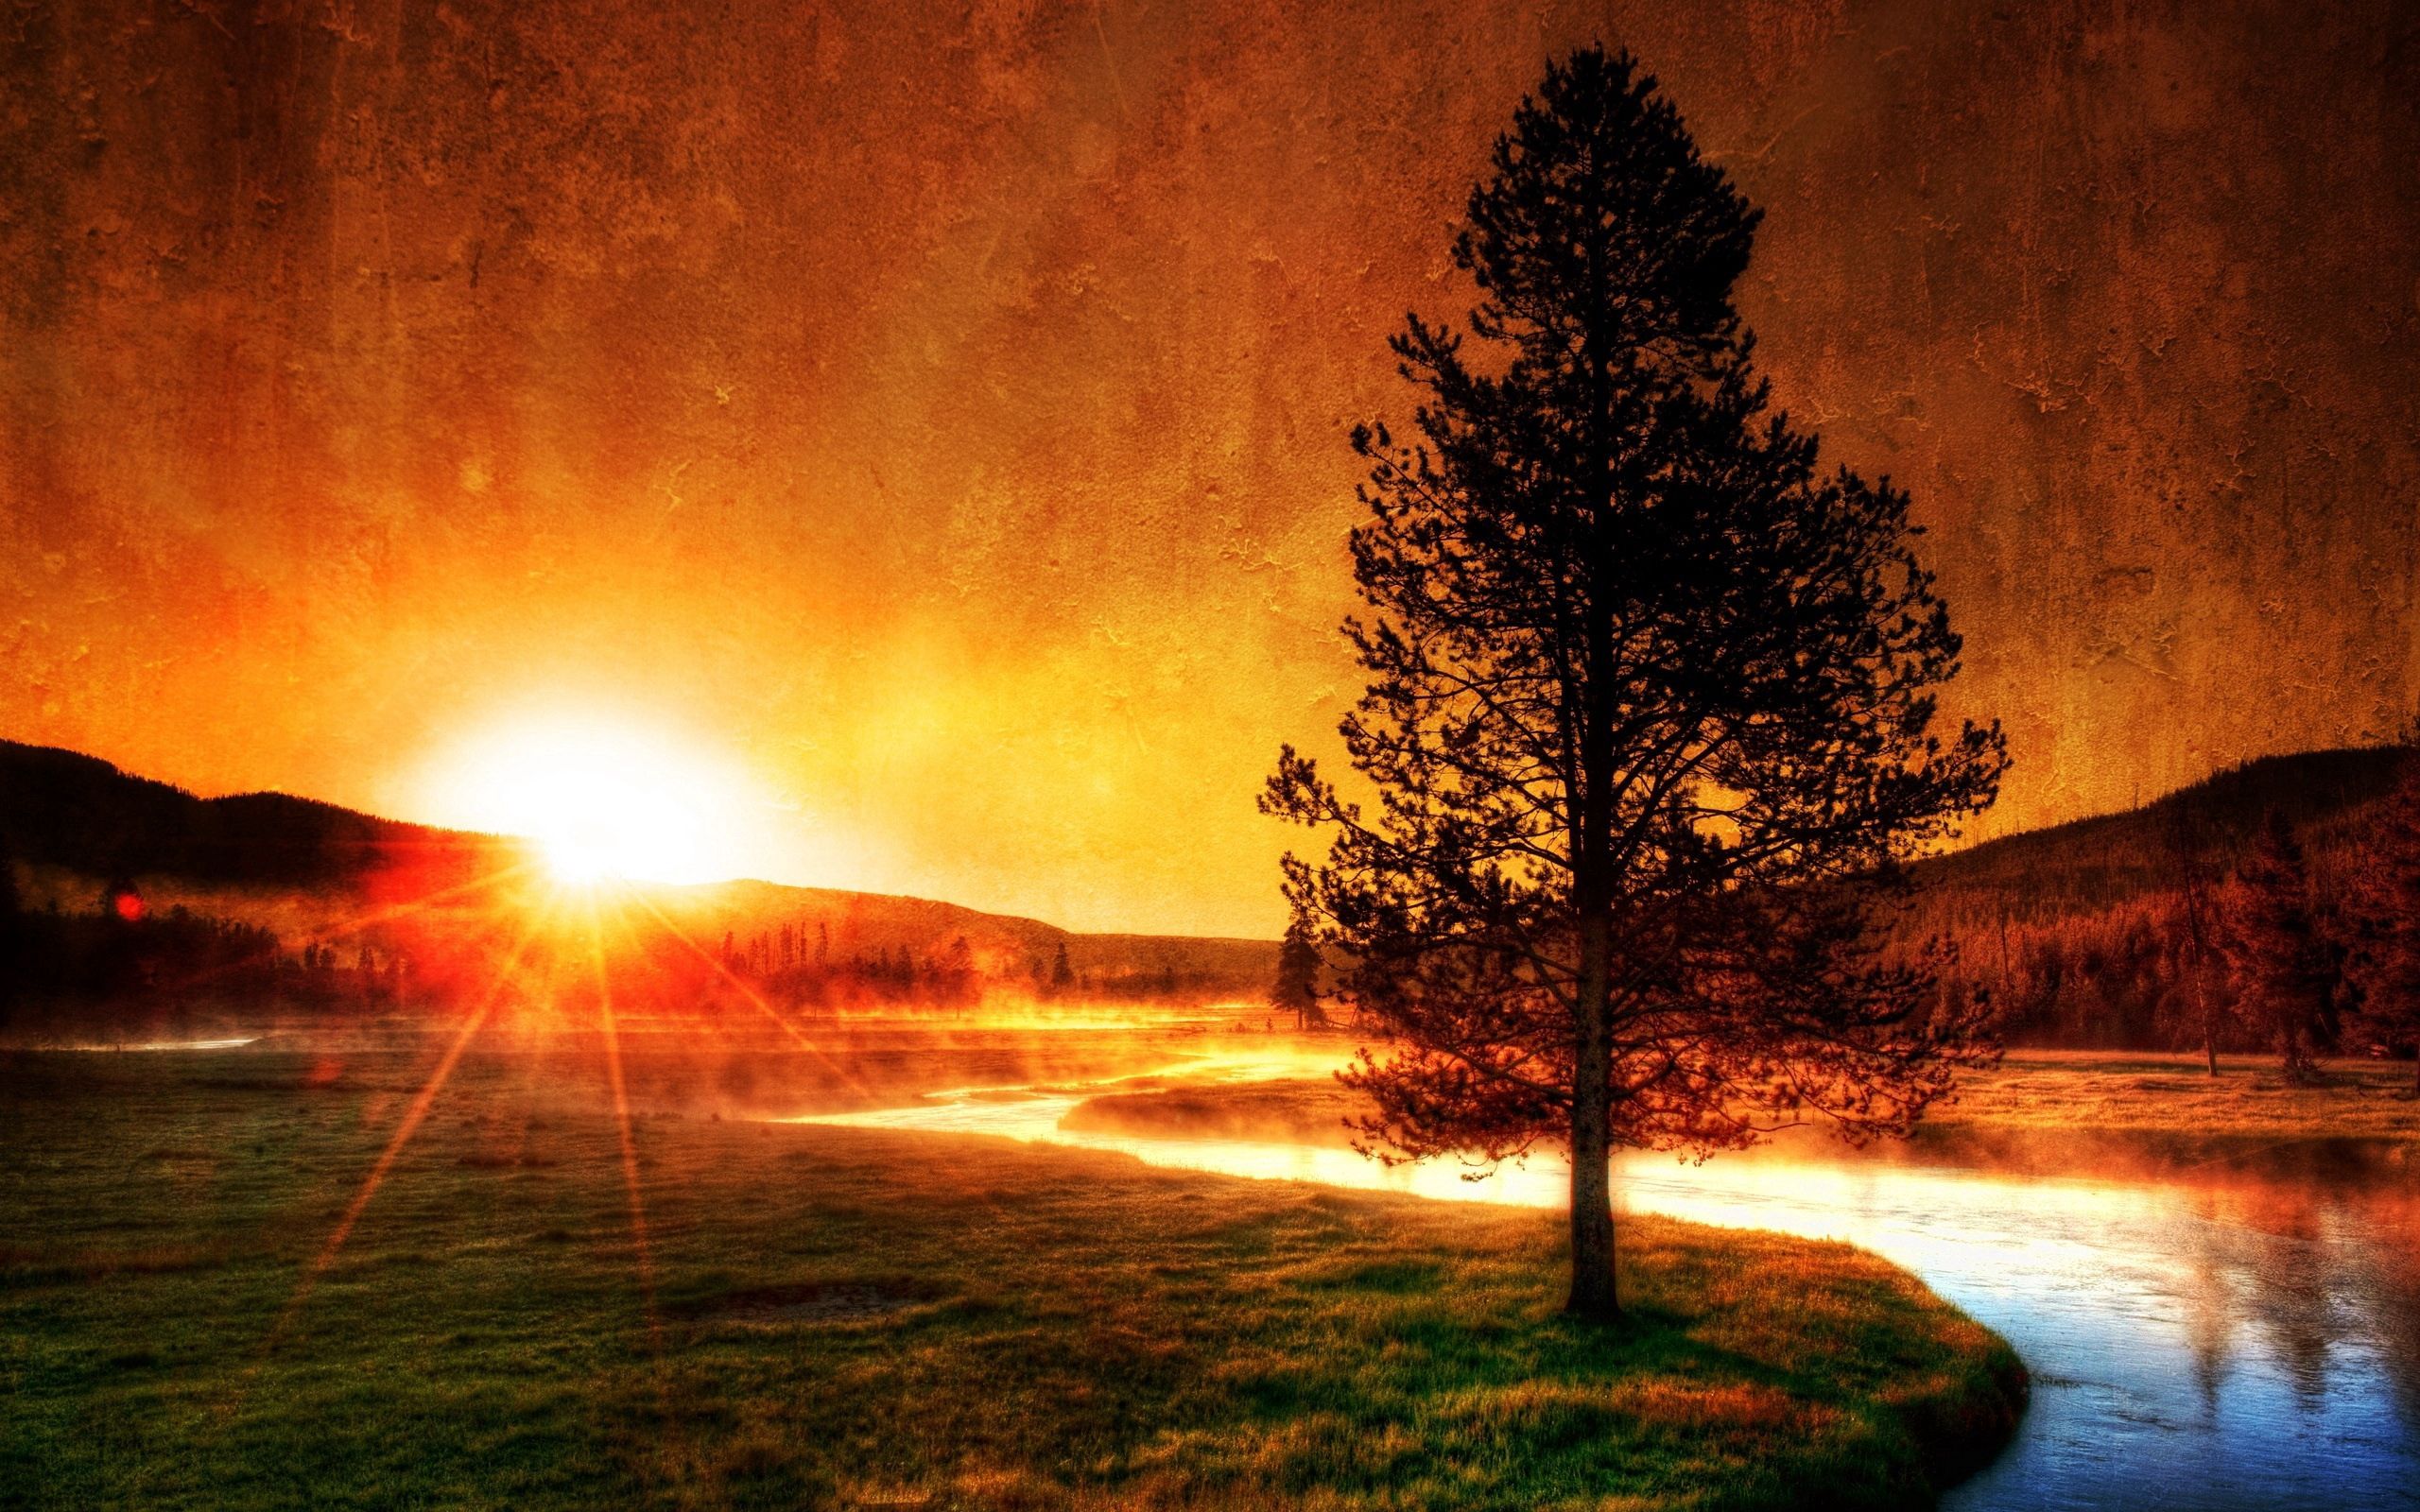 Download background beams, nature, rivers, sunset, sun, wood, rays, tree, fog, evening